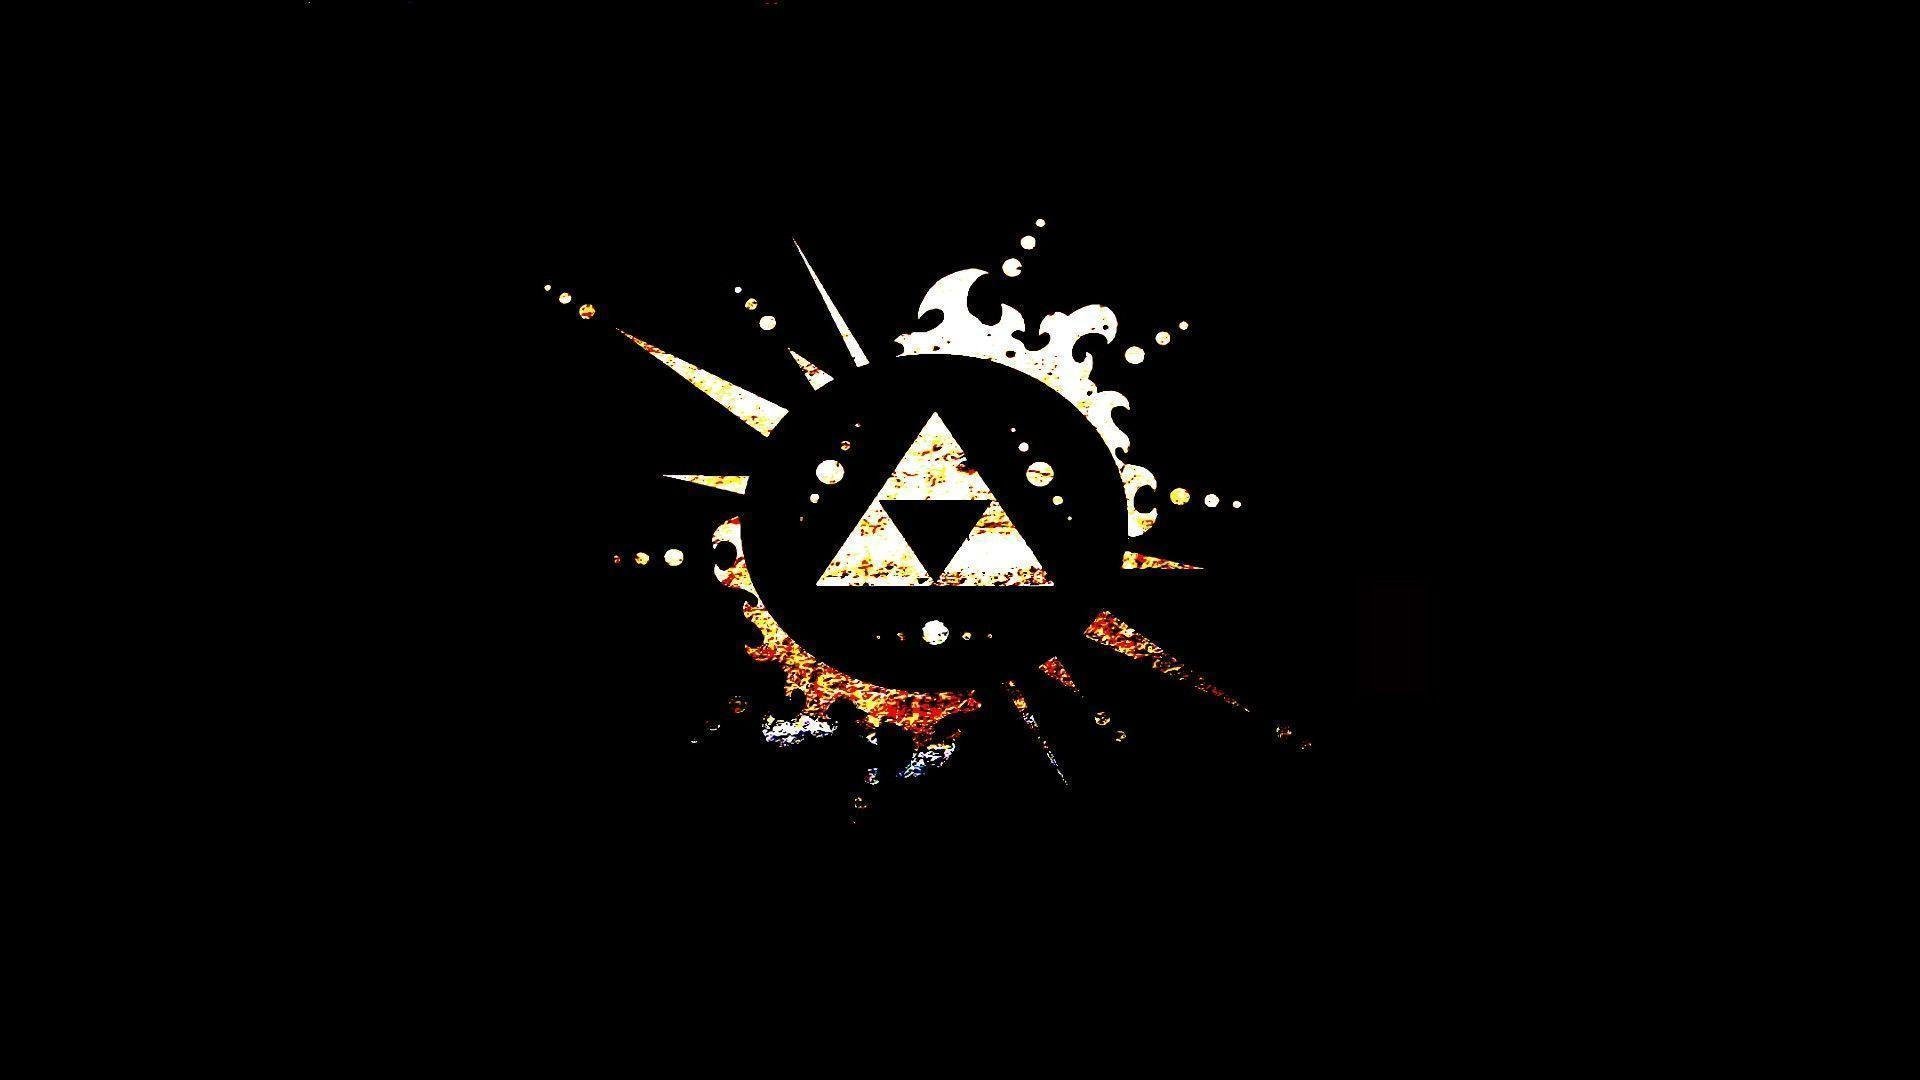 Download Triforce The Wallpaper 1920x1080